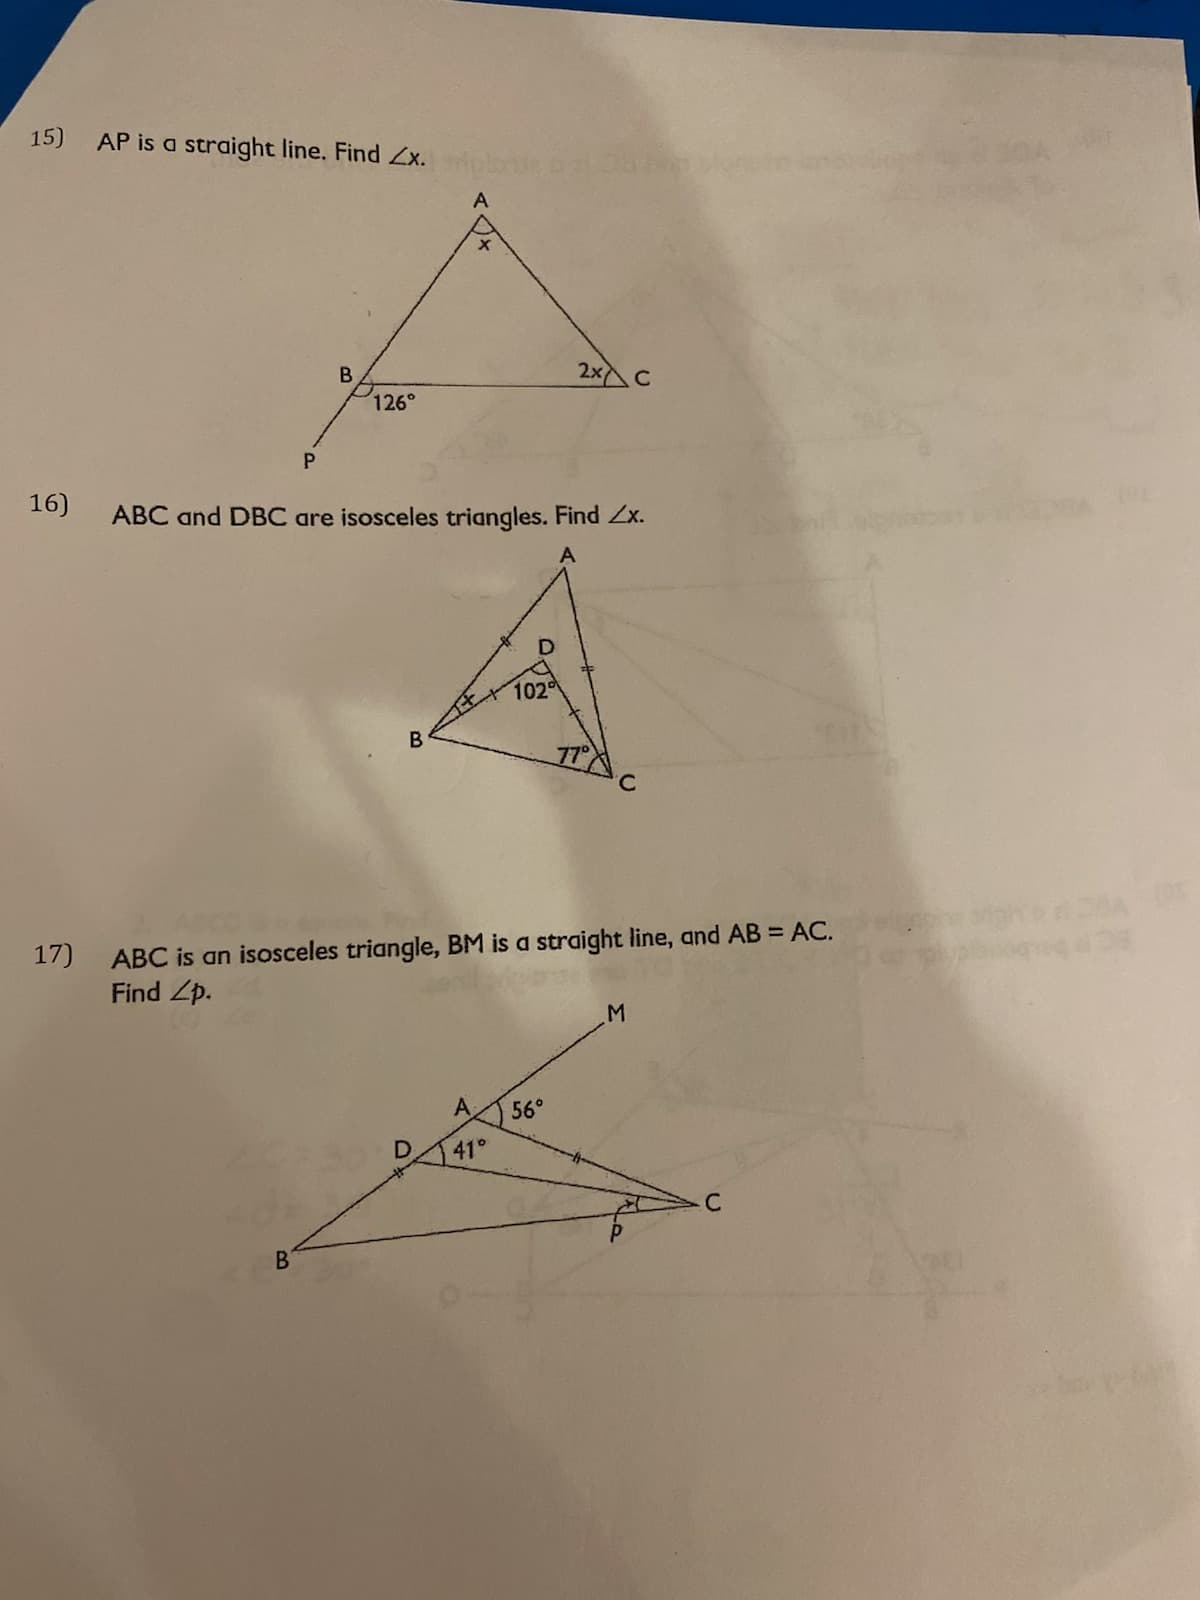 15)
AP is a straight line. Find Zx.
2xC
B.
126°
ABC and DBC are isosceles triangles. Find Zx.
B.
17)
EC
ABC is an isosceles triangle, BM is a straight line, and AB = AC.
Find Zp.
A
41°
C.
